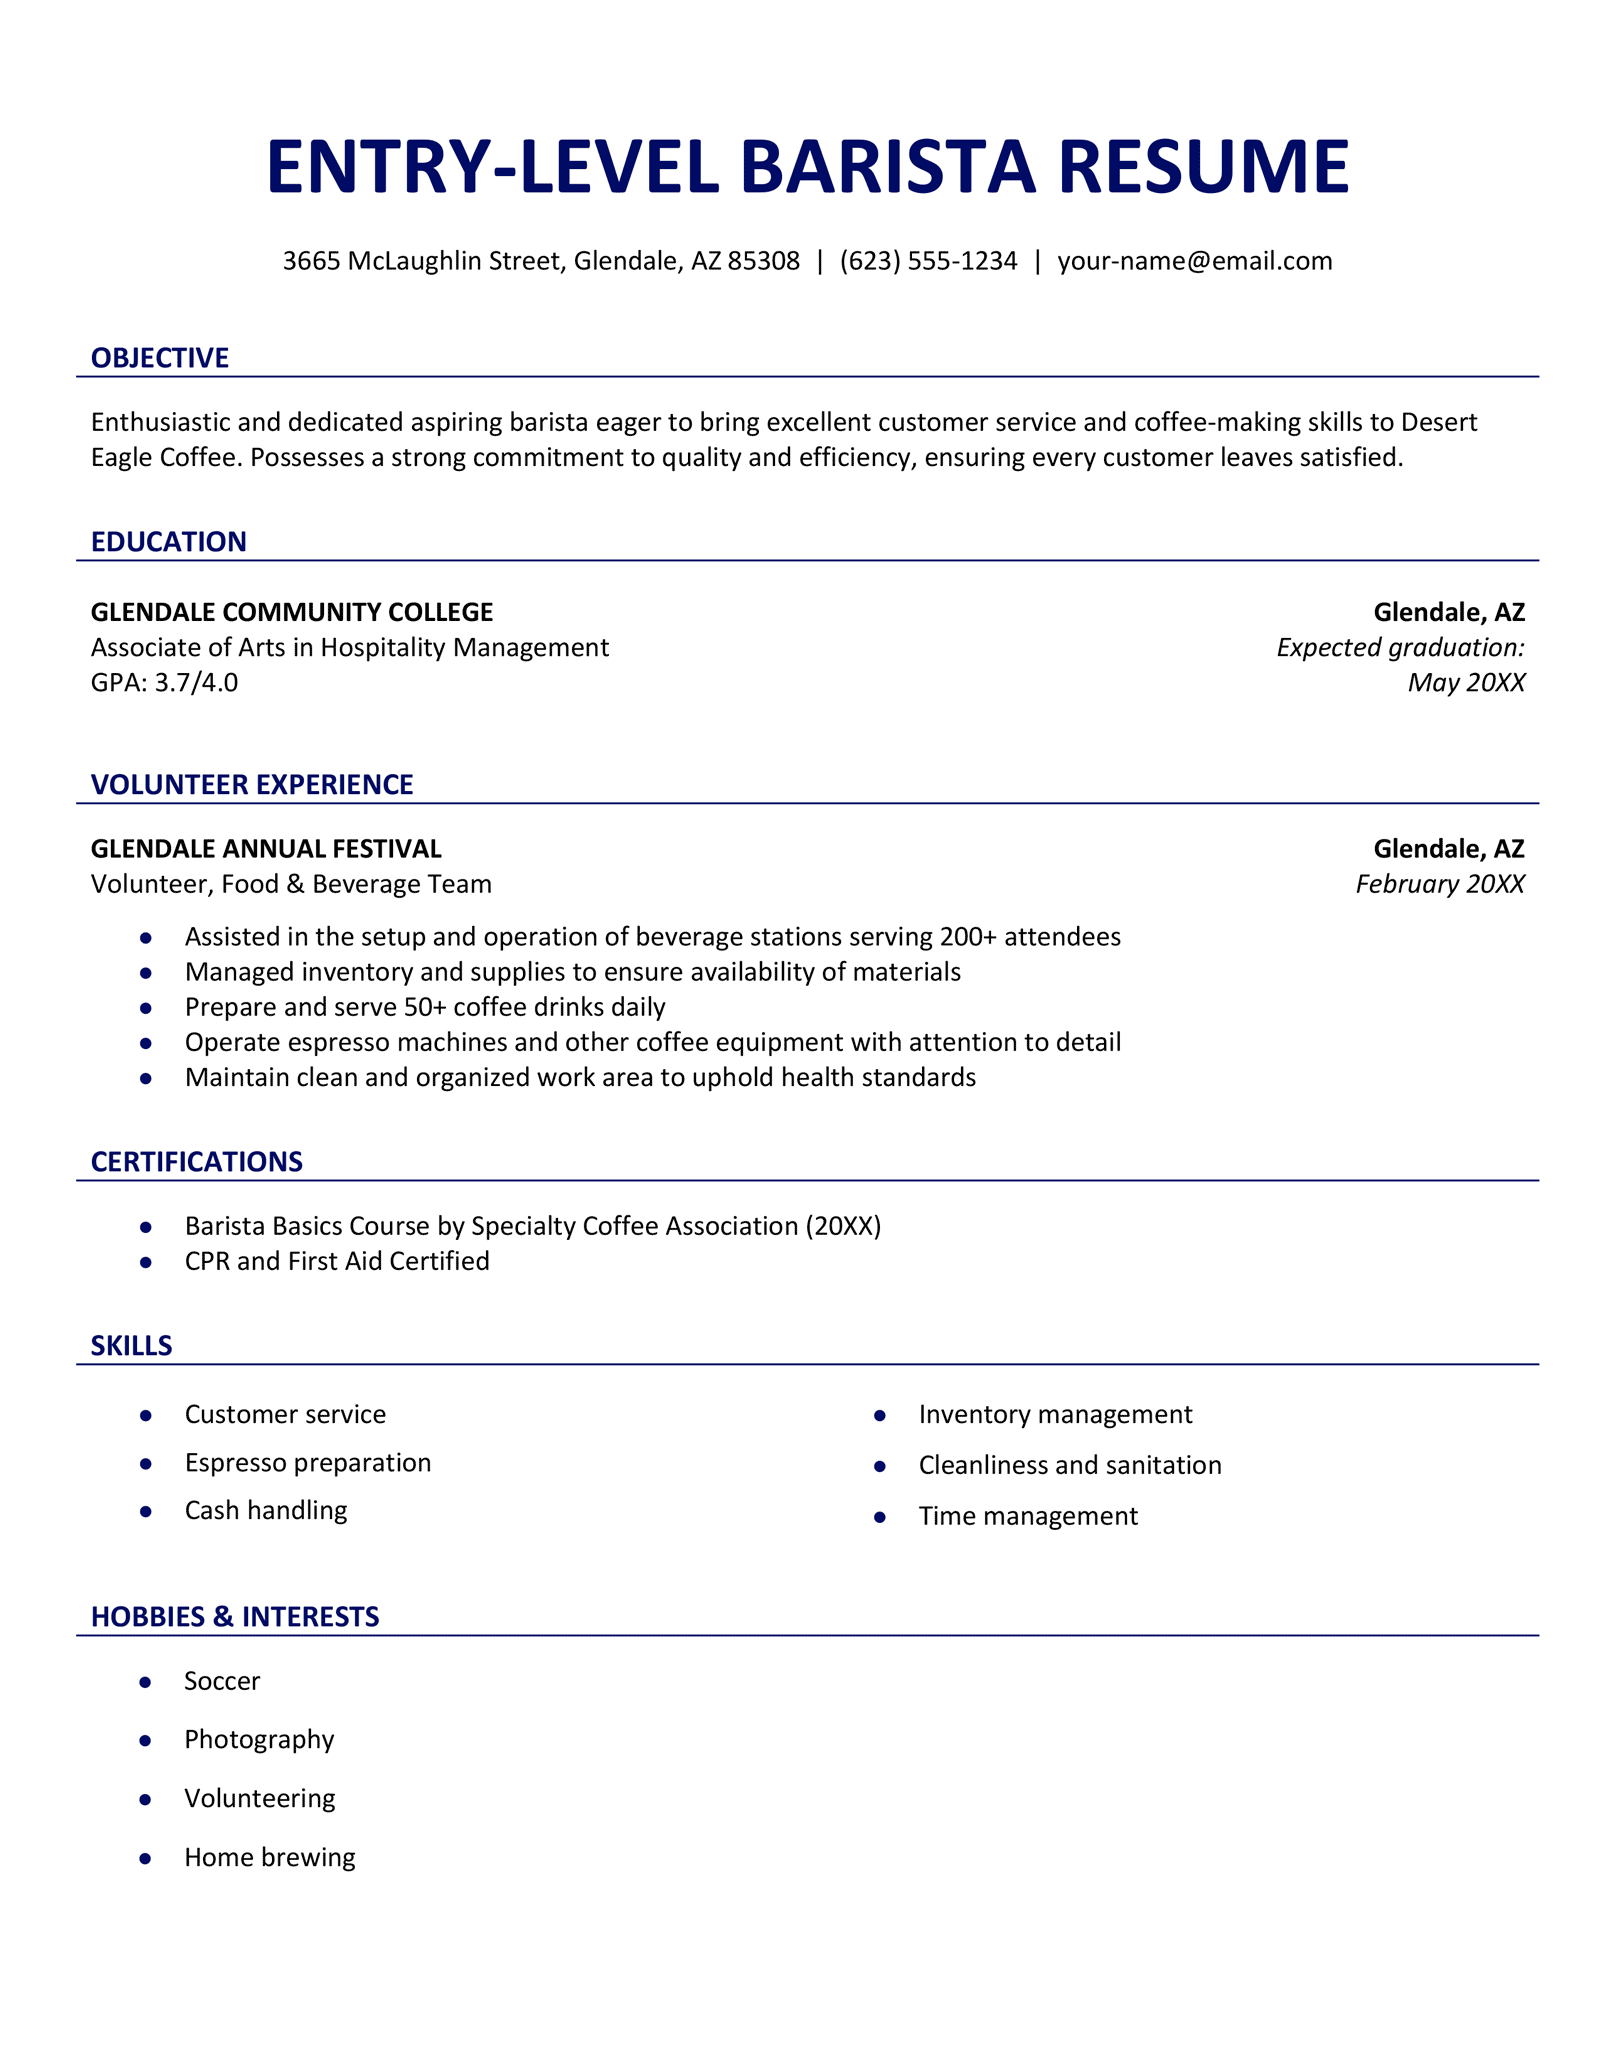 An entry-level barista resume with a navy blue color scheme and an optional hobbies and interests section.